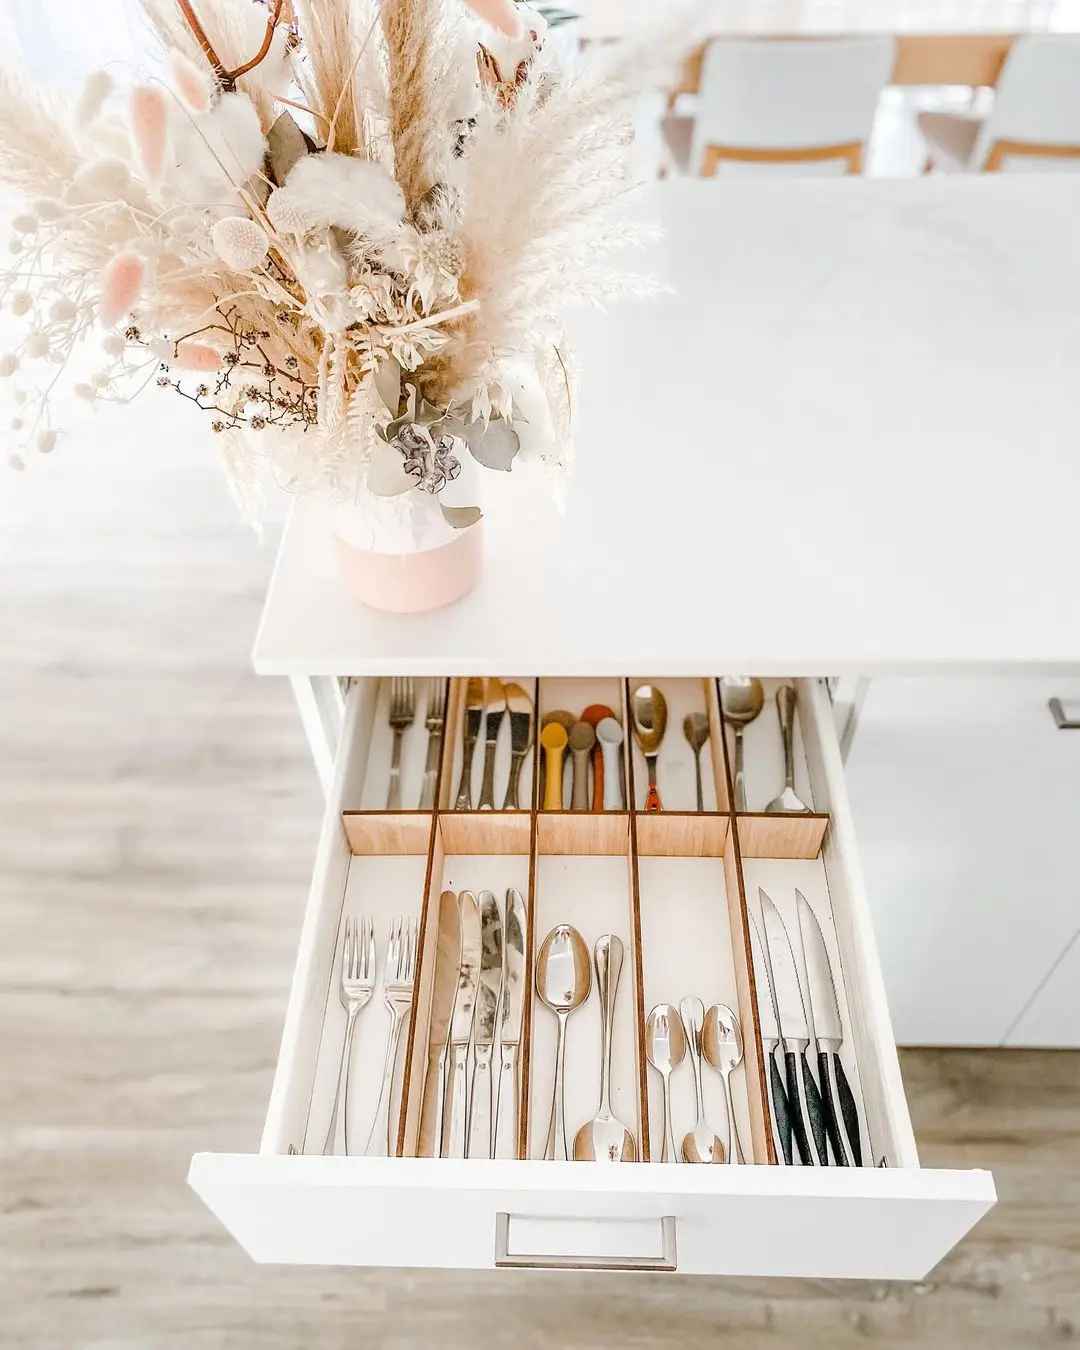 20 Easy Examples of Drawer Organization That Will Make Your Life Easier ...